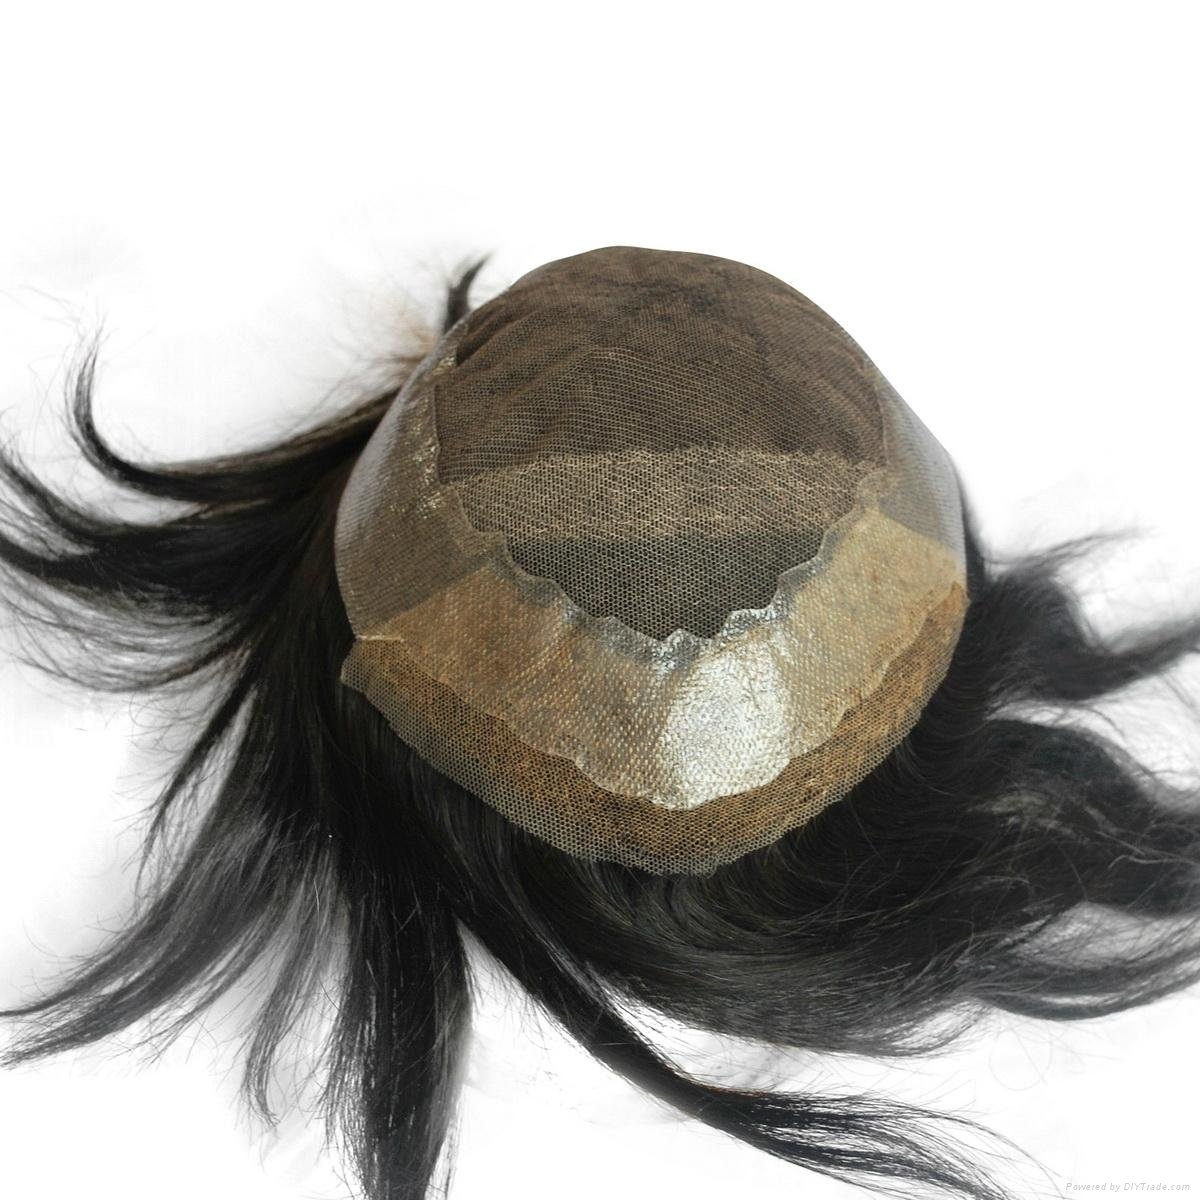 Hair wig for men in stock #1b human hair with pu around 5